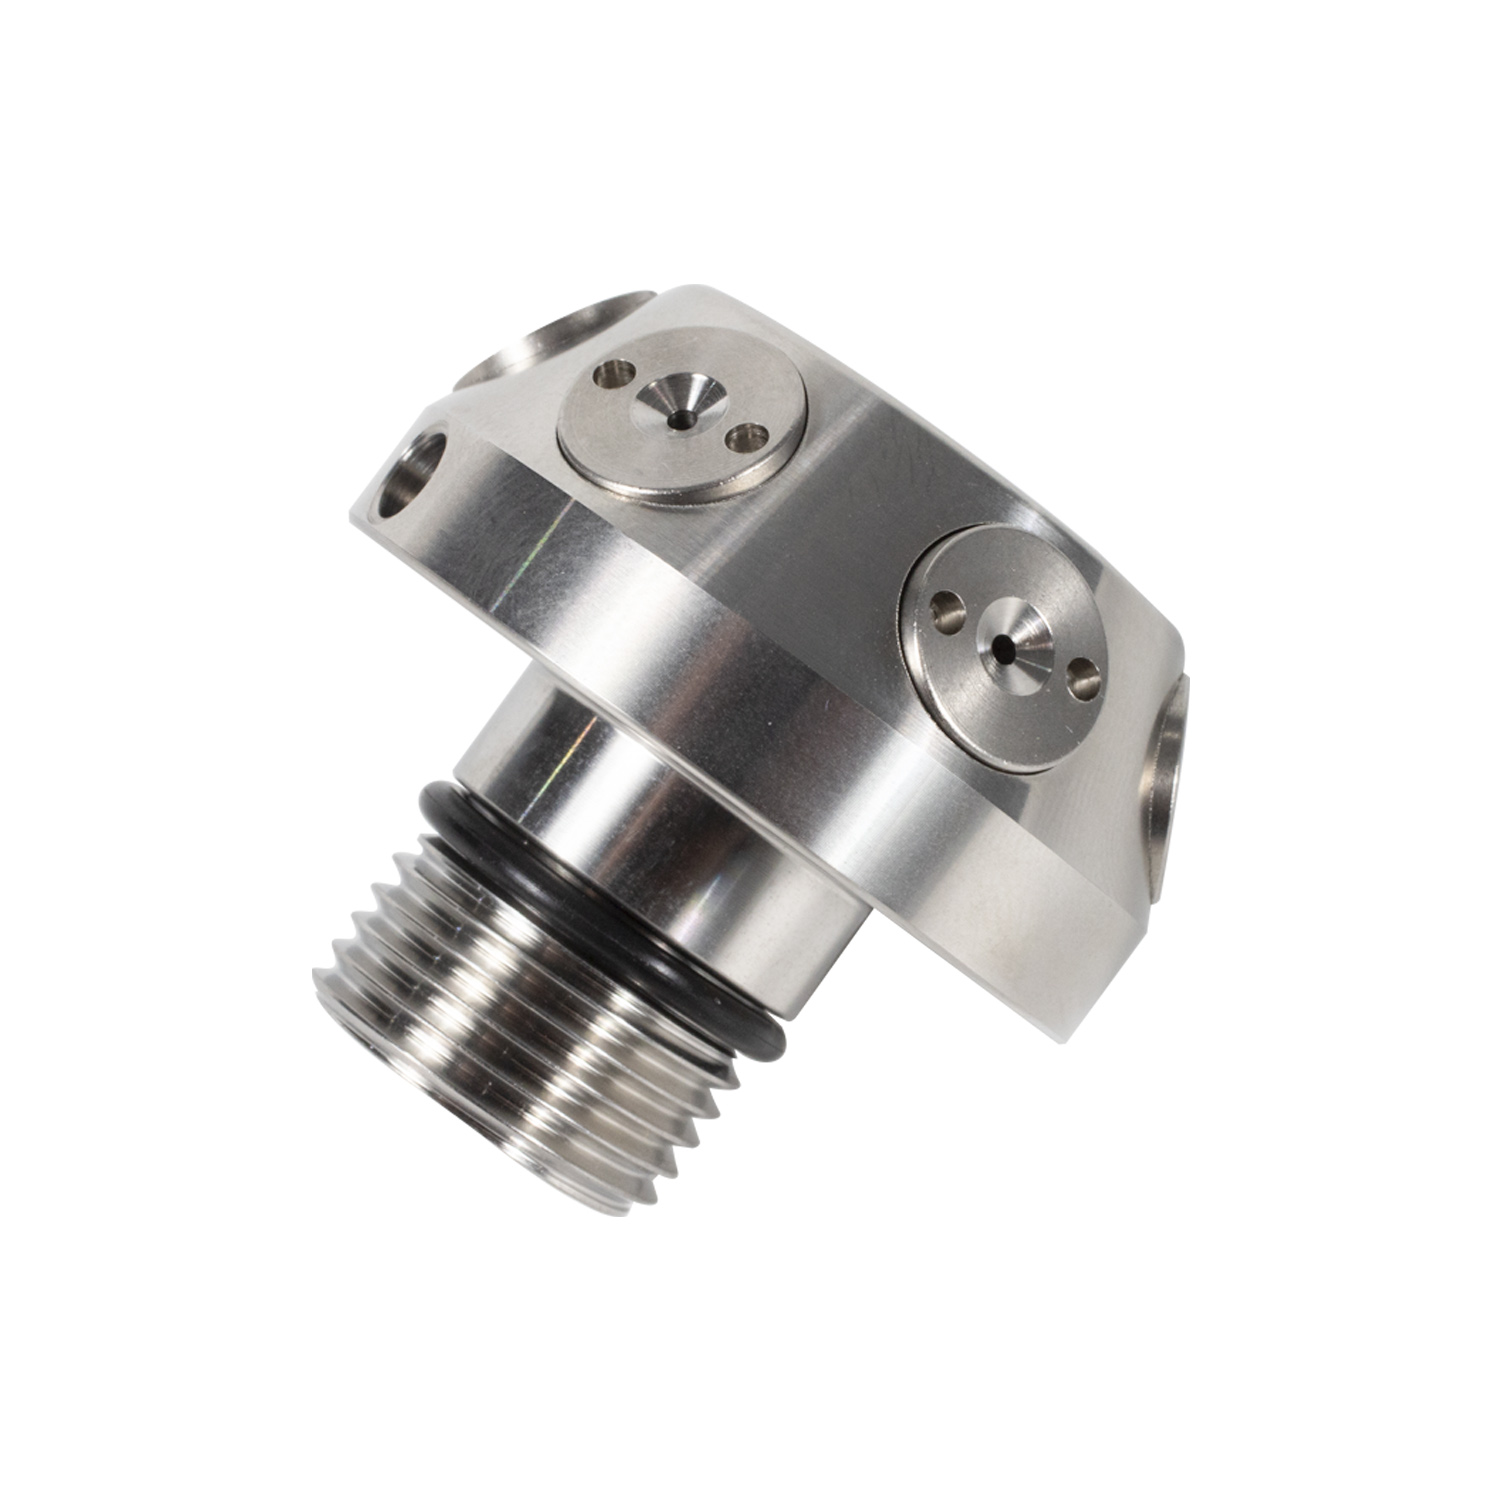 Stainless Steel Materials High Pressure Water Mist Nozzle Customize for Fixed Fire Protection Systems